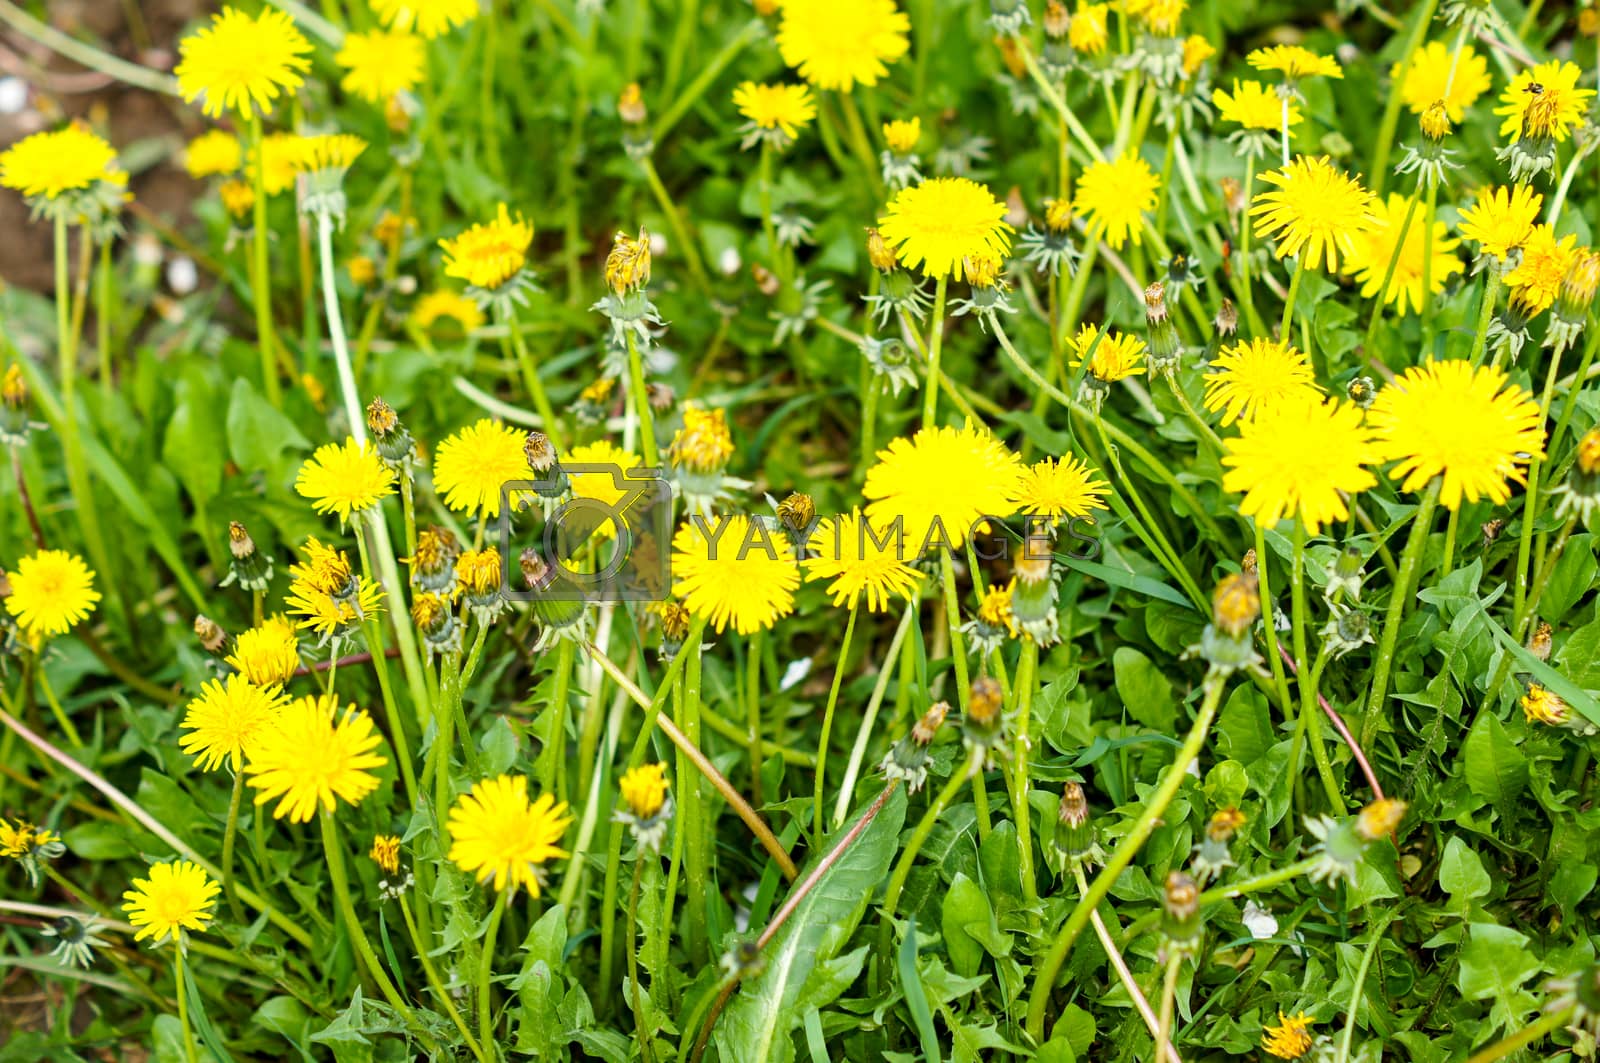 Royalty free image of yellow dandelions growing on a lawn illuminated by the sunlight by Adamchuk